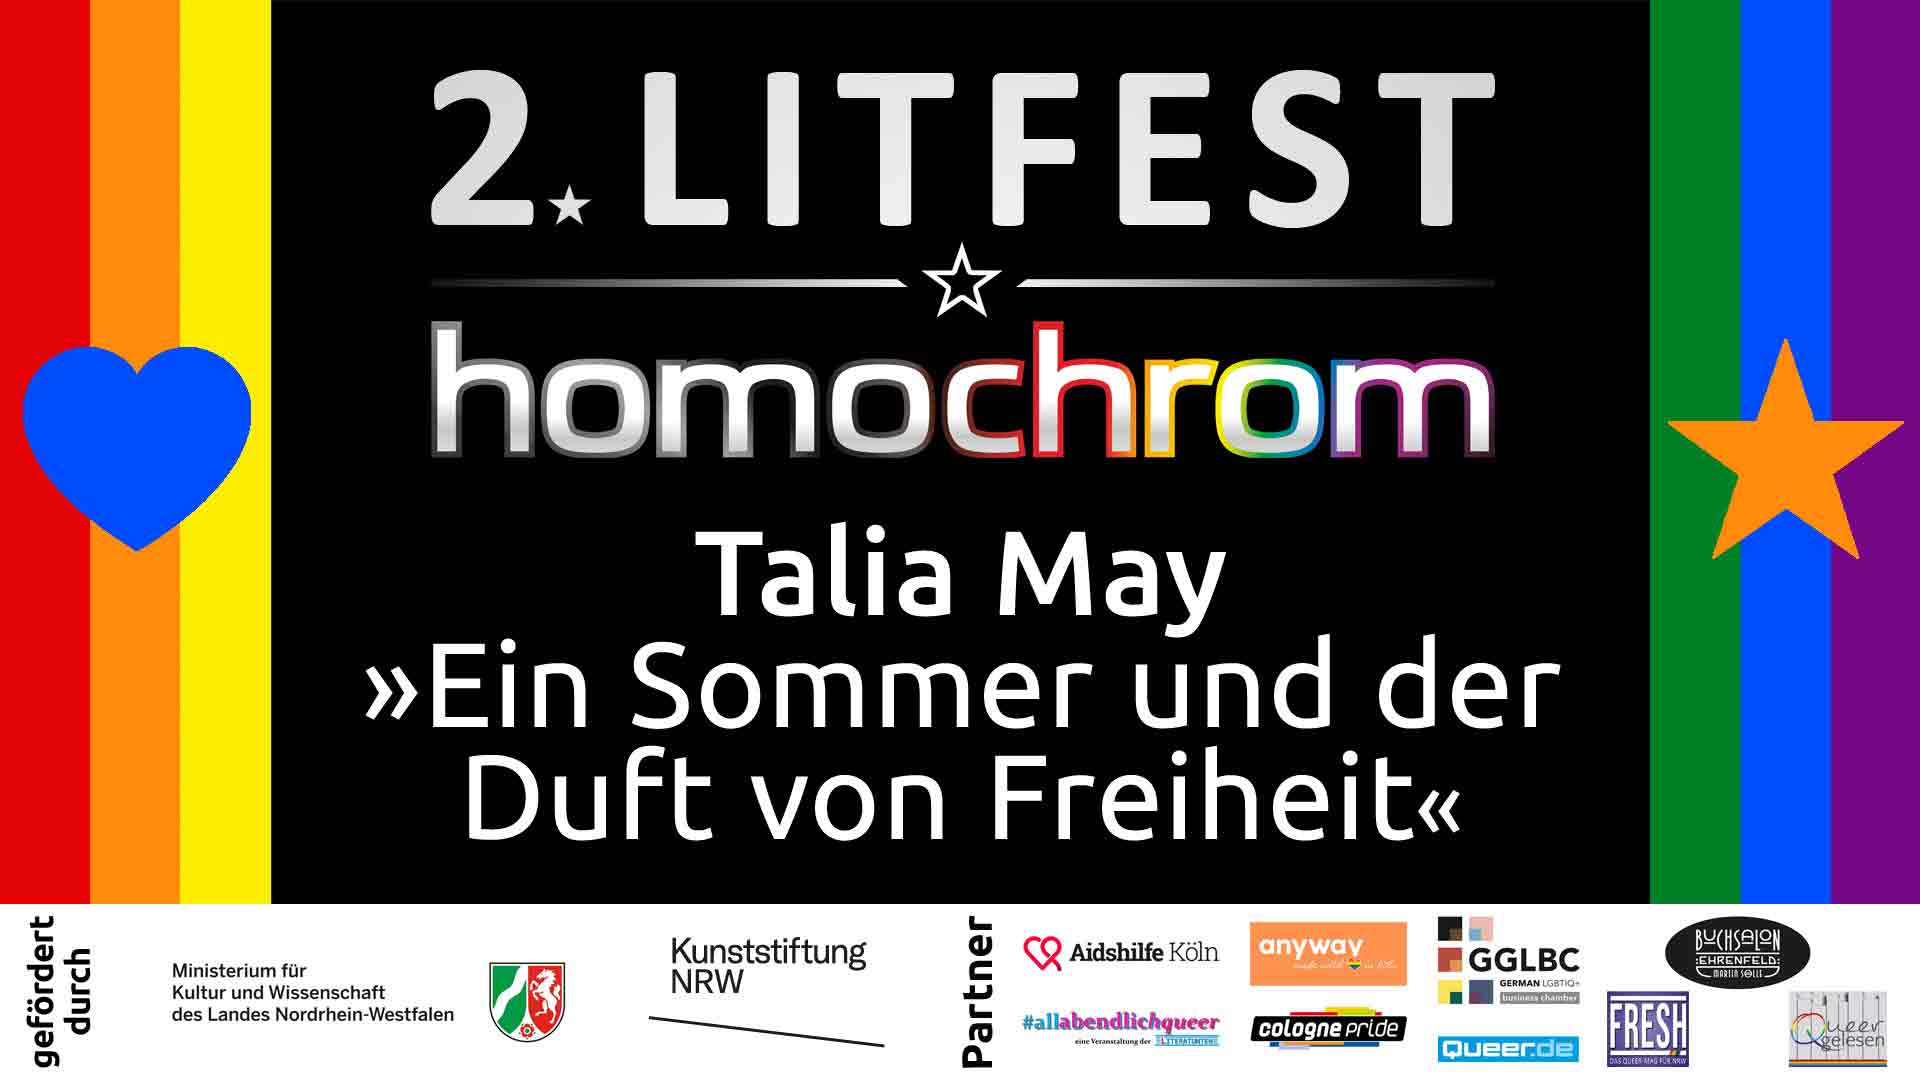 Youtube Video, Talia May, 2. Litfest homochrom